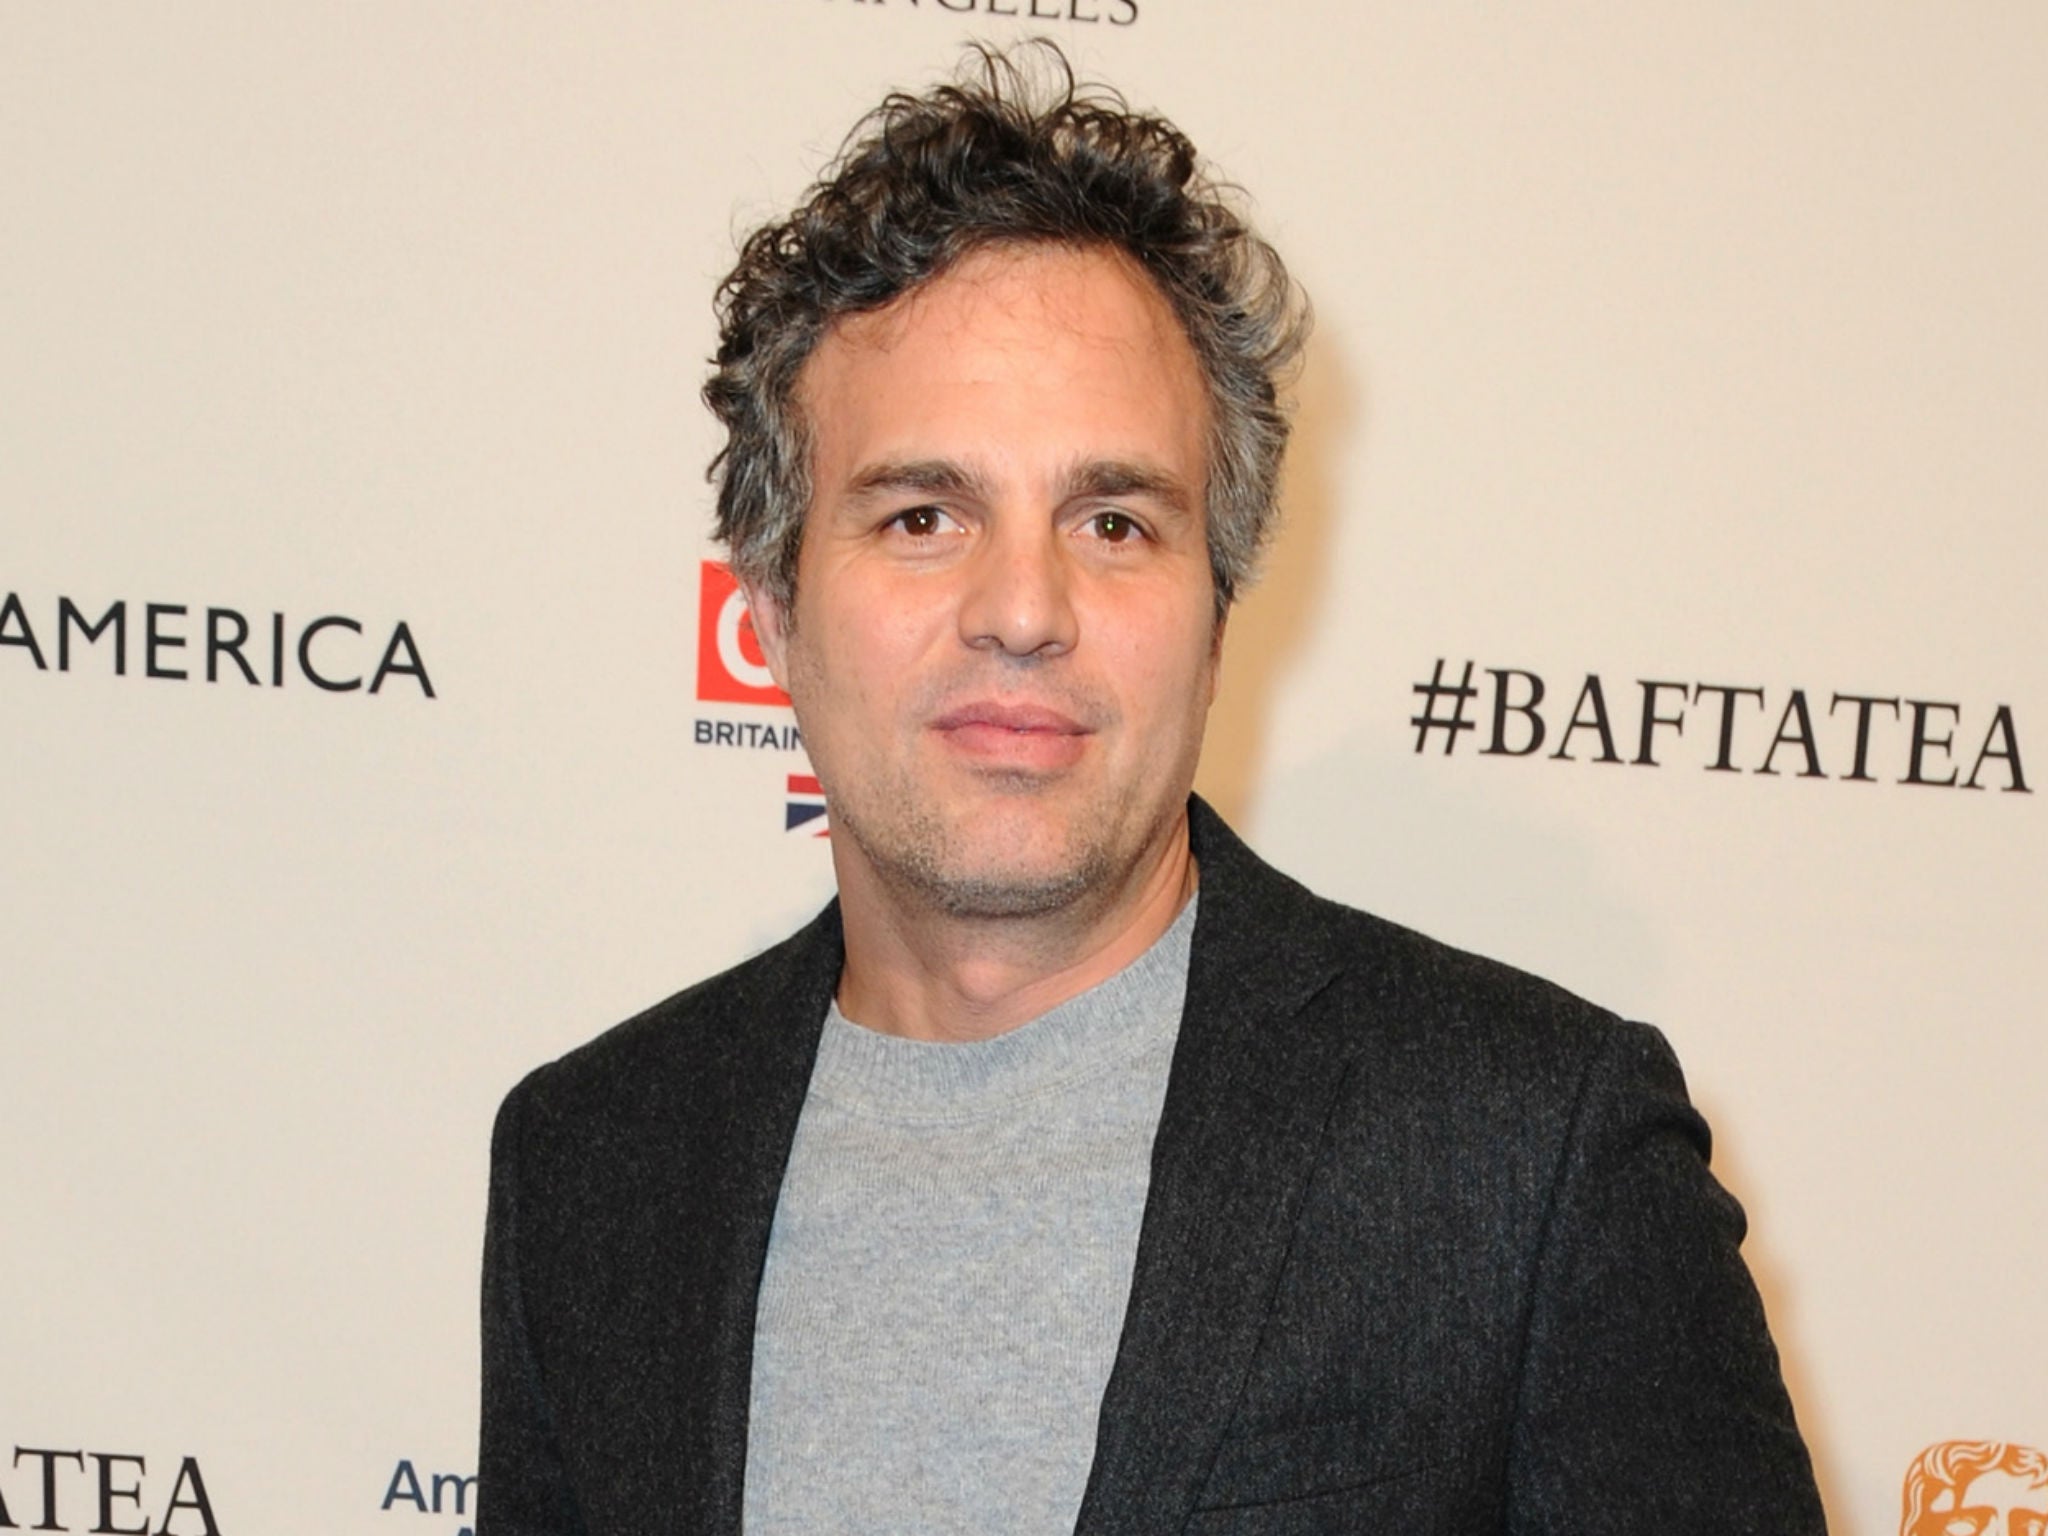 Ruffalo appealed for his lost belongings on Twitter